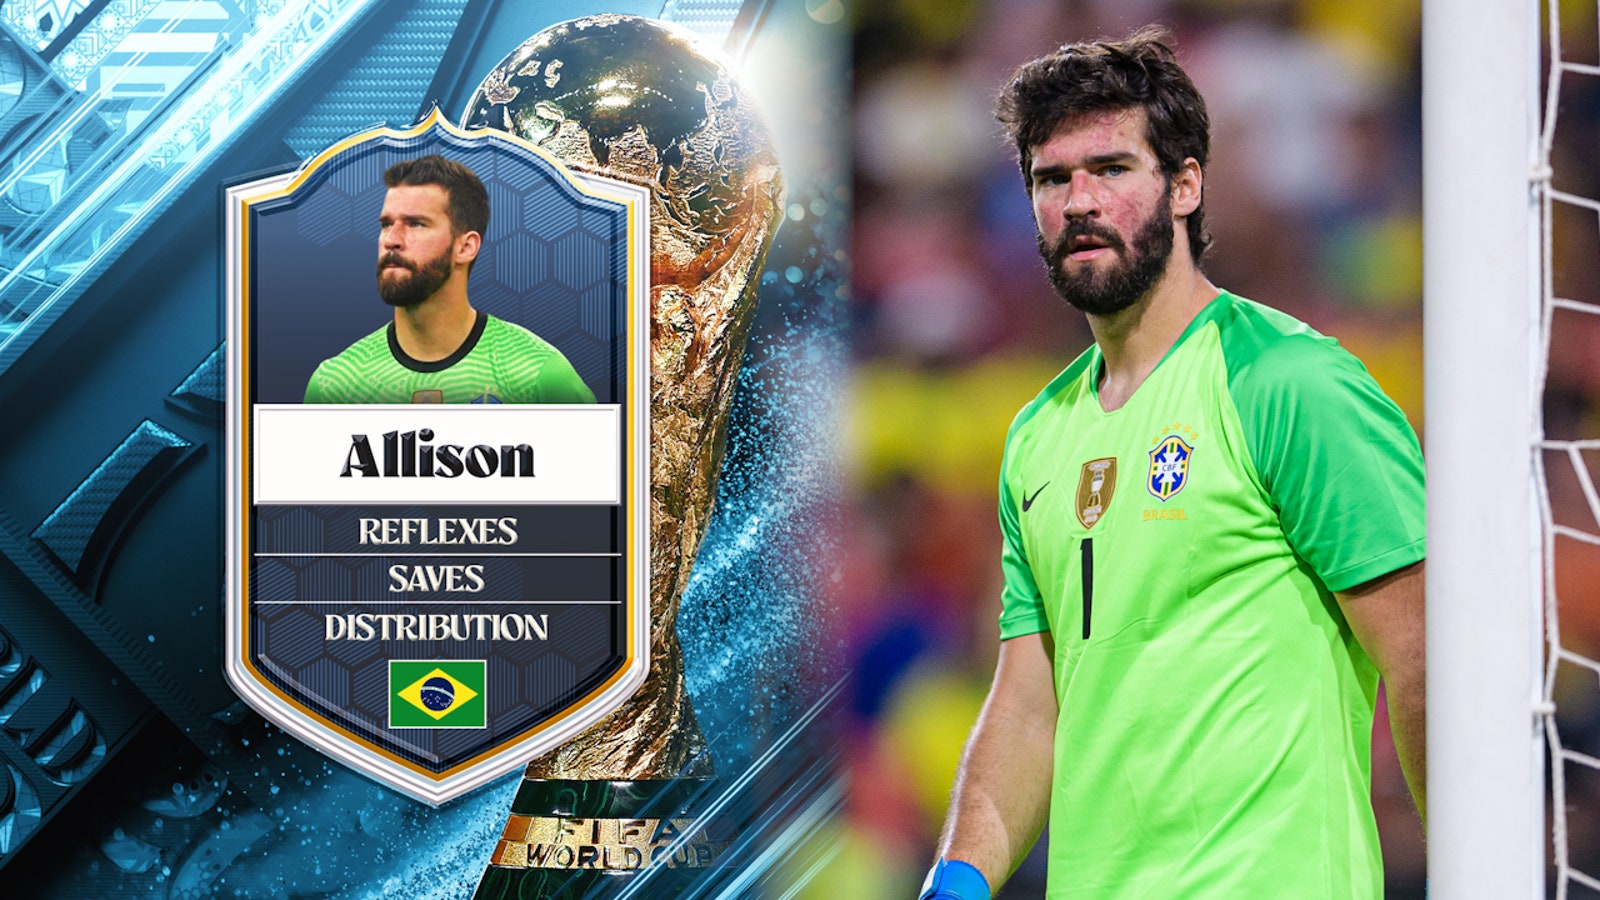 Brazil's Allison: No. 25 | Stu Holden's Top 50 Players in the 2022 FIFA Men's World Cup